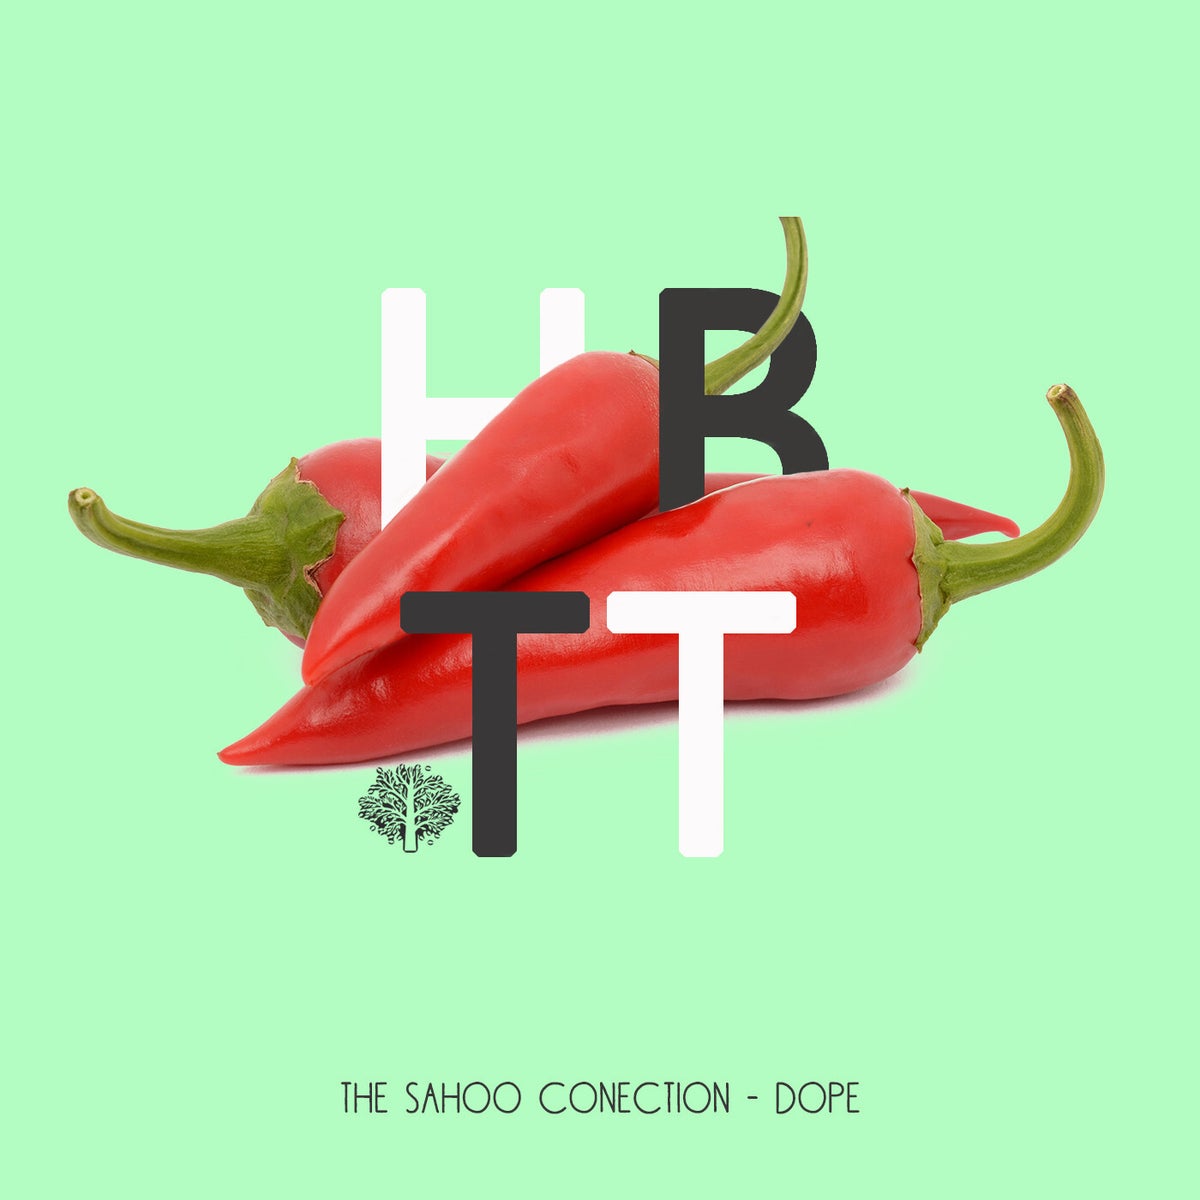 The Sahoo Conection - DOPE [HBT404]